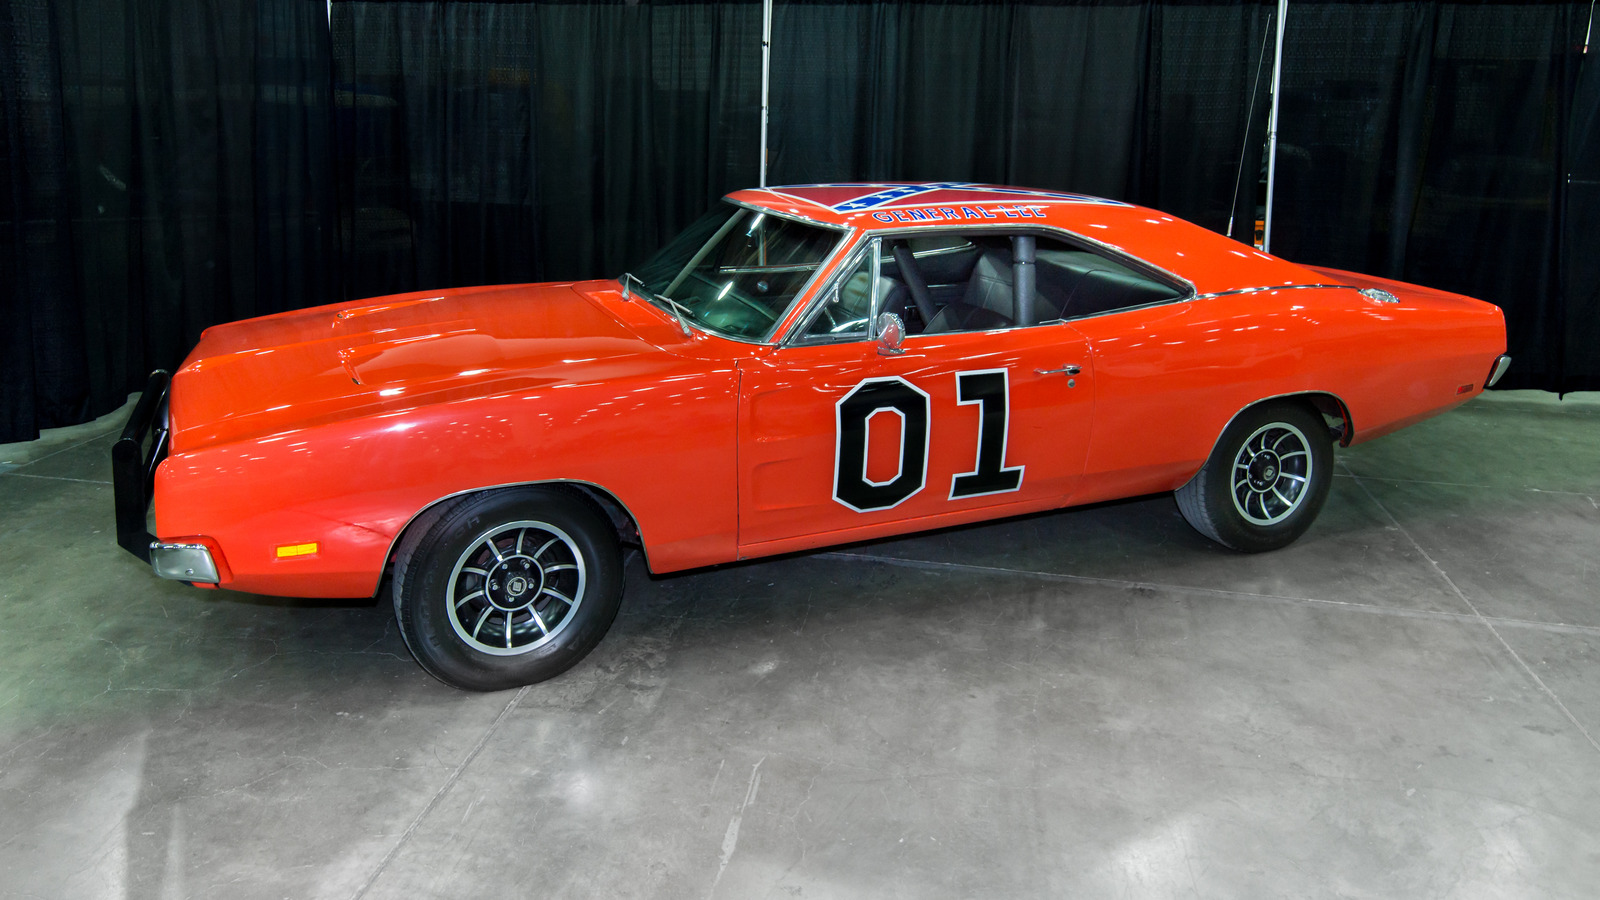 https://www.slashgear.com/img/gallery/the-tragic-truth-about-this-dukes-of-hazzard-stars-dodge-charger/l-intro-1657827419.jpg